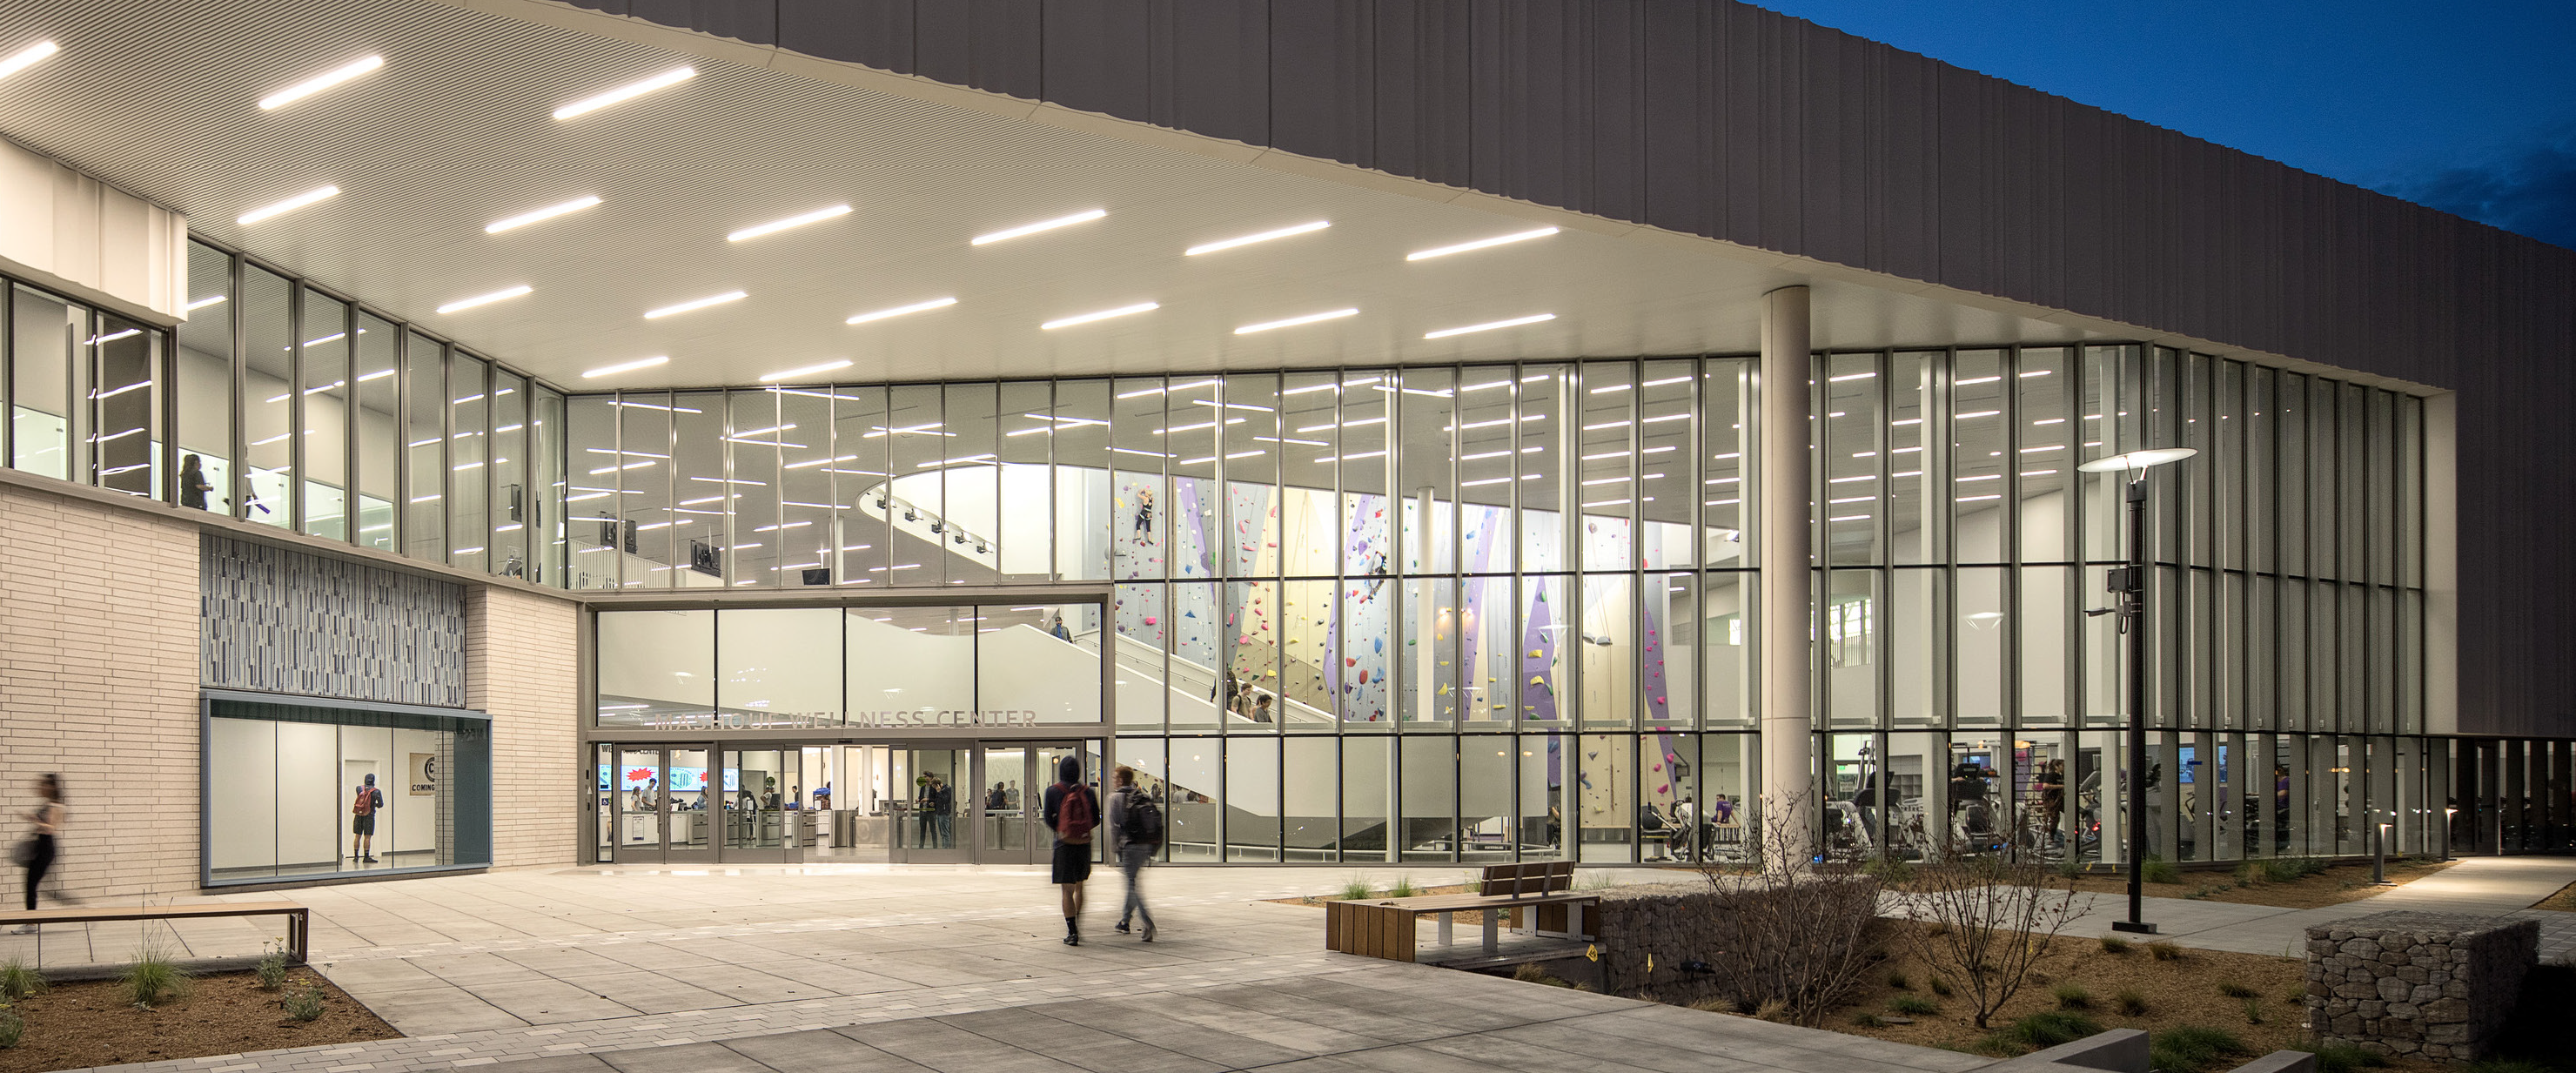 Main entrance of the wellness center in the evening